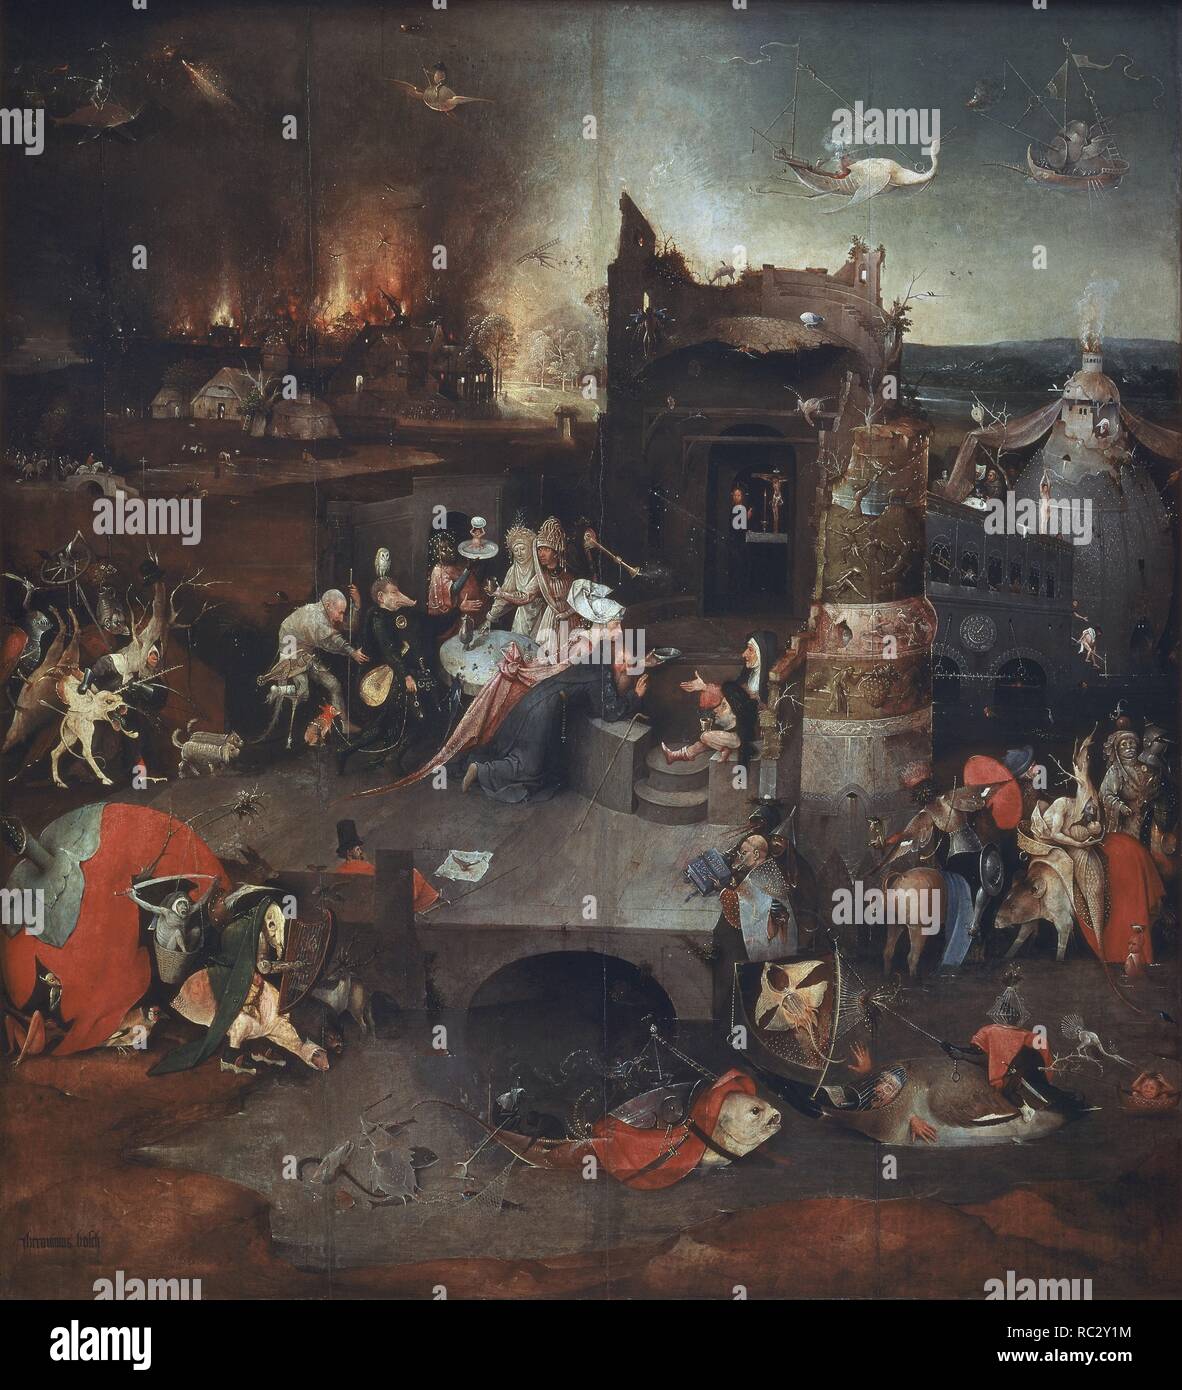 Temptation of St. Anthony (centre panel) - 1505/06 - oil on panel - 131x119. Author: BOSCH, HIERONYMUS. Location: MUSEO DE ARTE ANTIGUO. LISBOA. PORTUGAL. Stock Photo